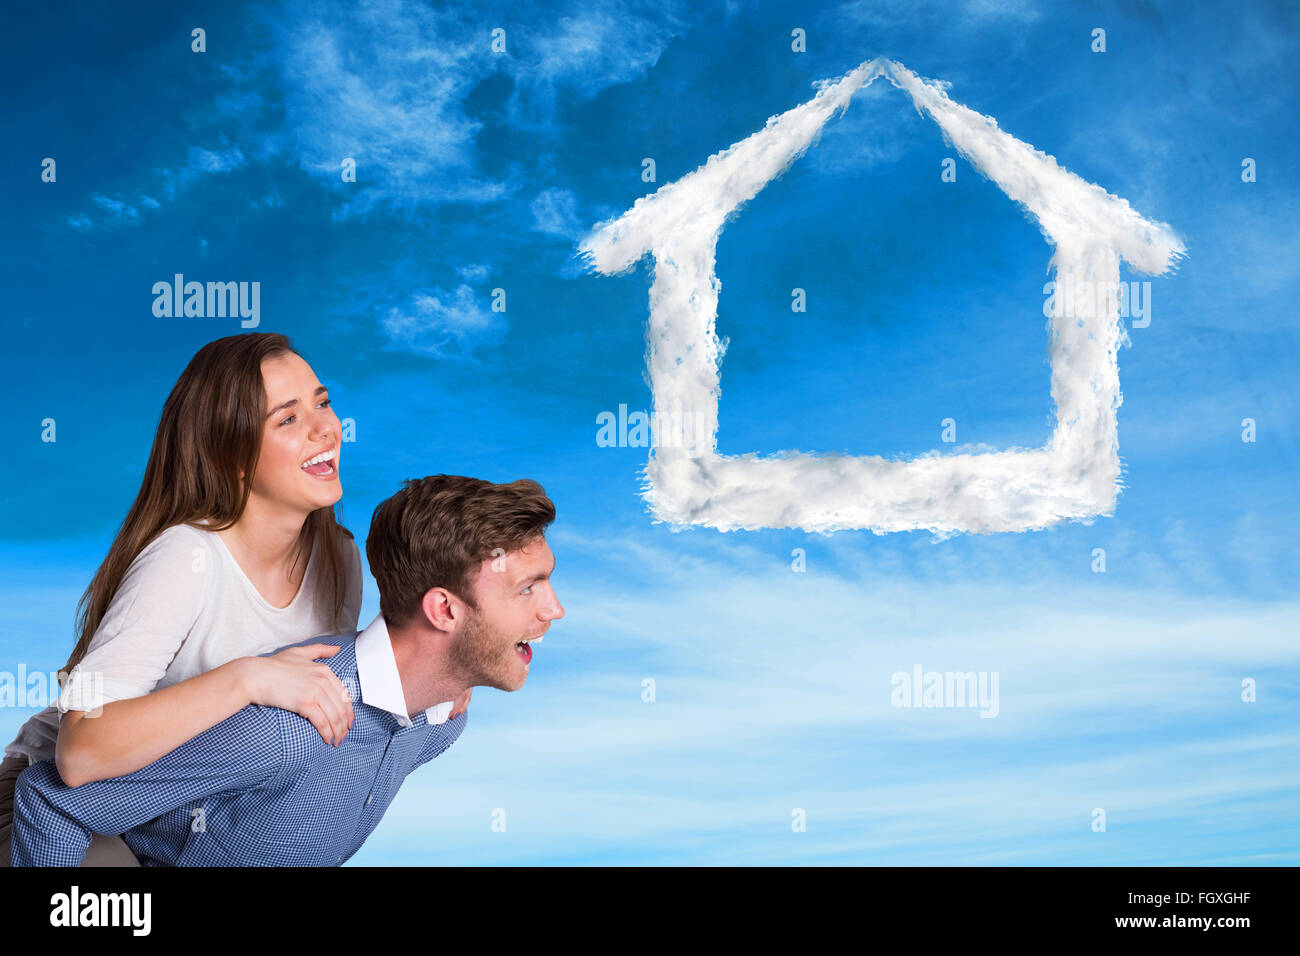 Composite image of smiling young man carrying woman Stock Photo